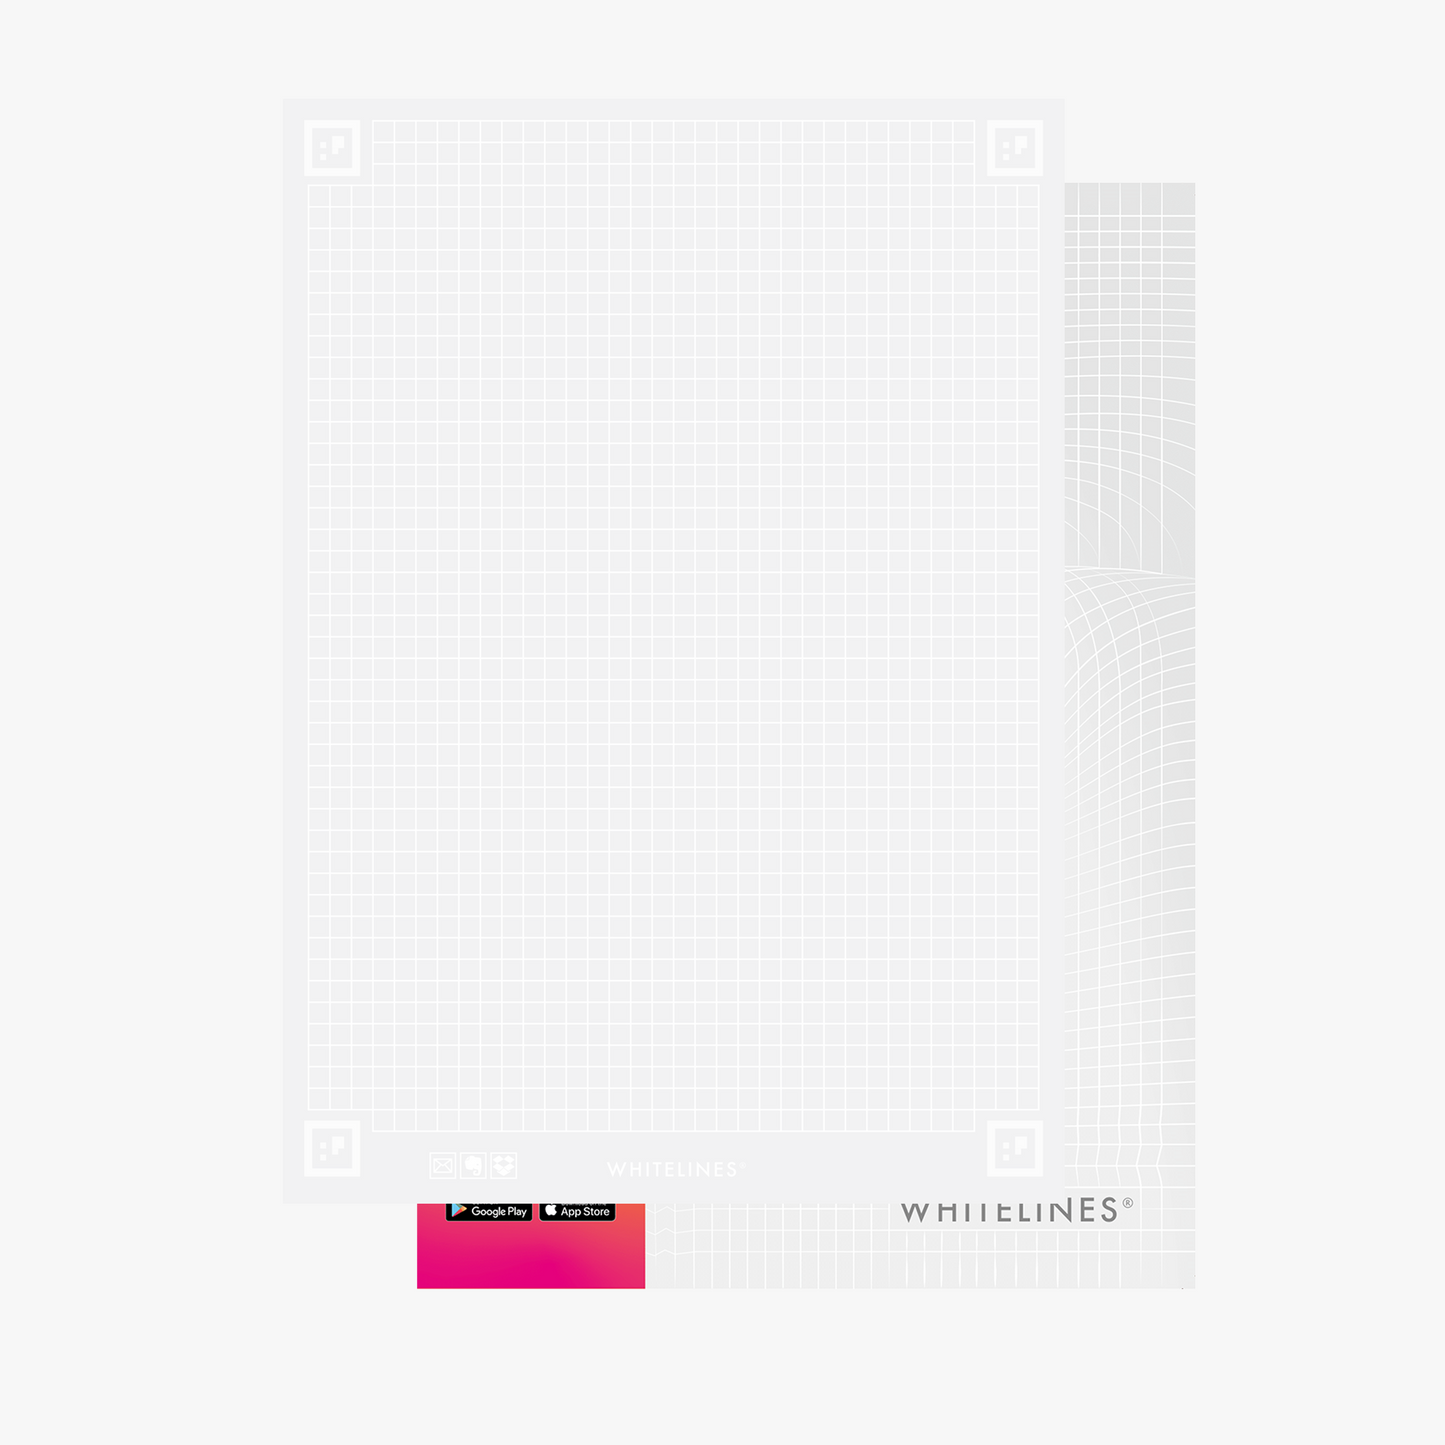 Whitelines Revelations B5 Graphed/Squared Notebook perfect for writing, sketching, journaling, drawing, working and studying effectively